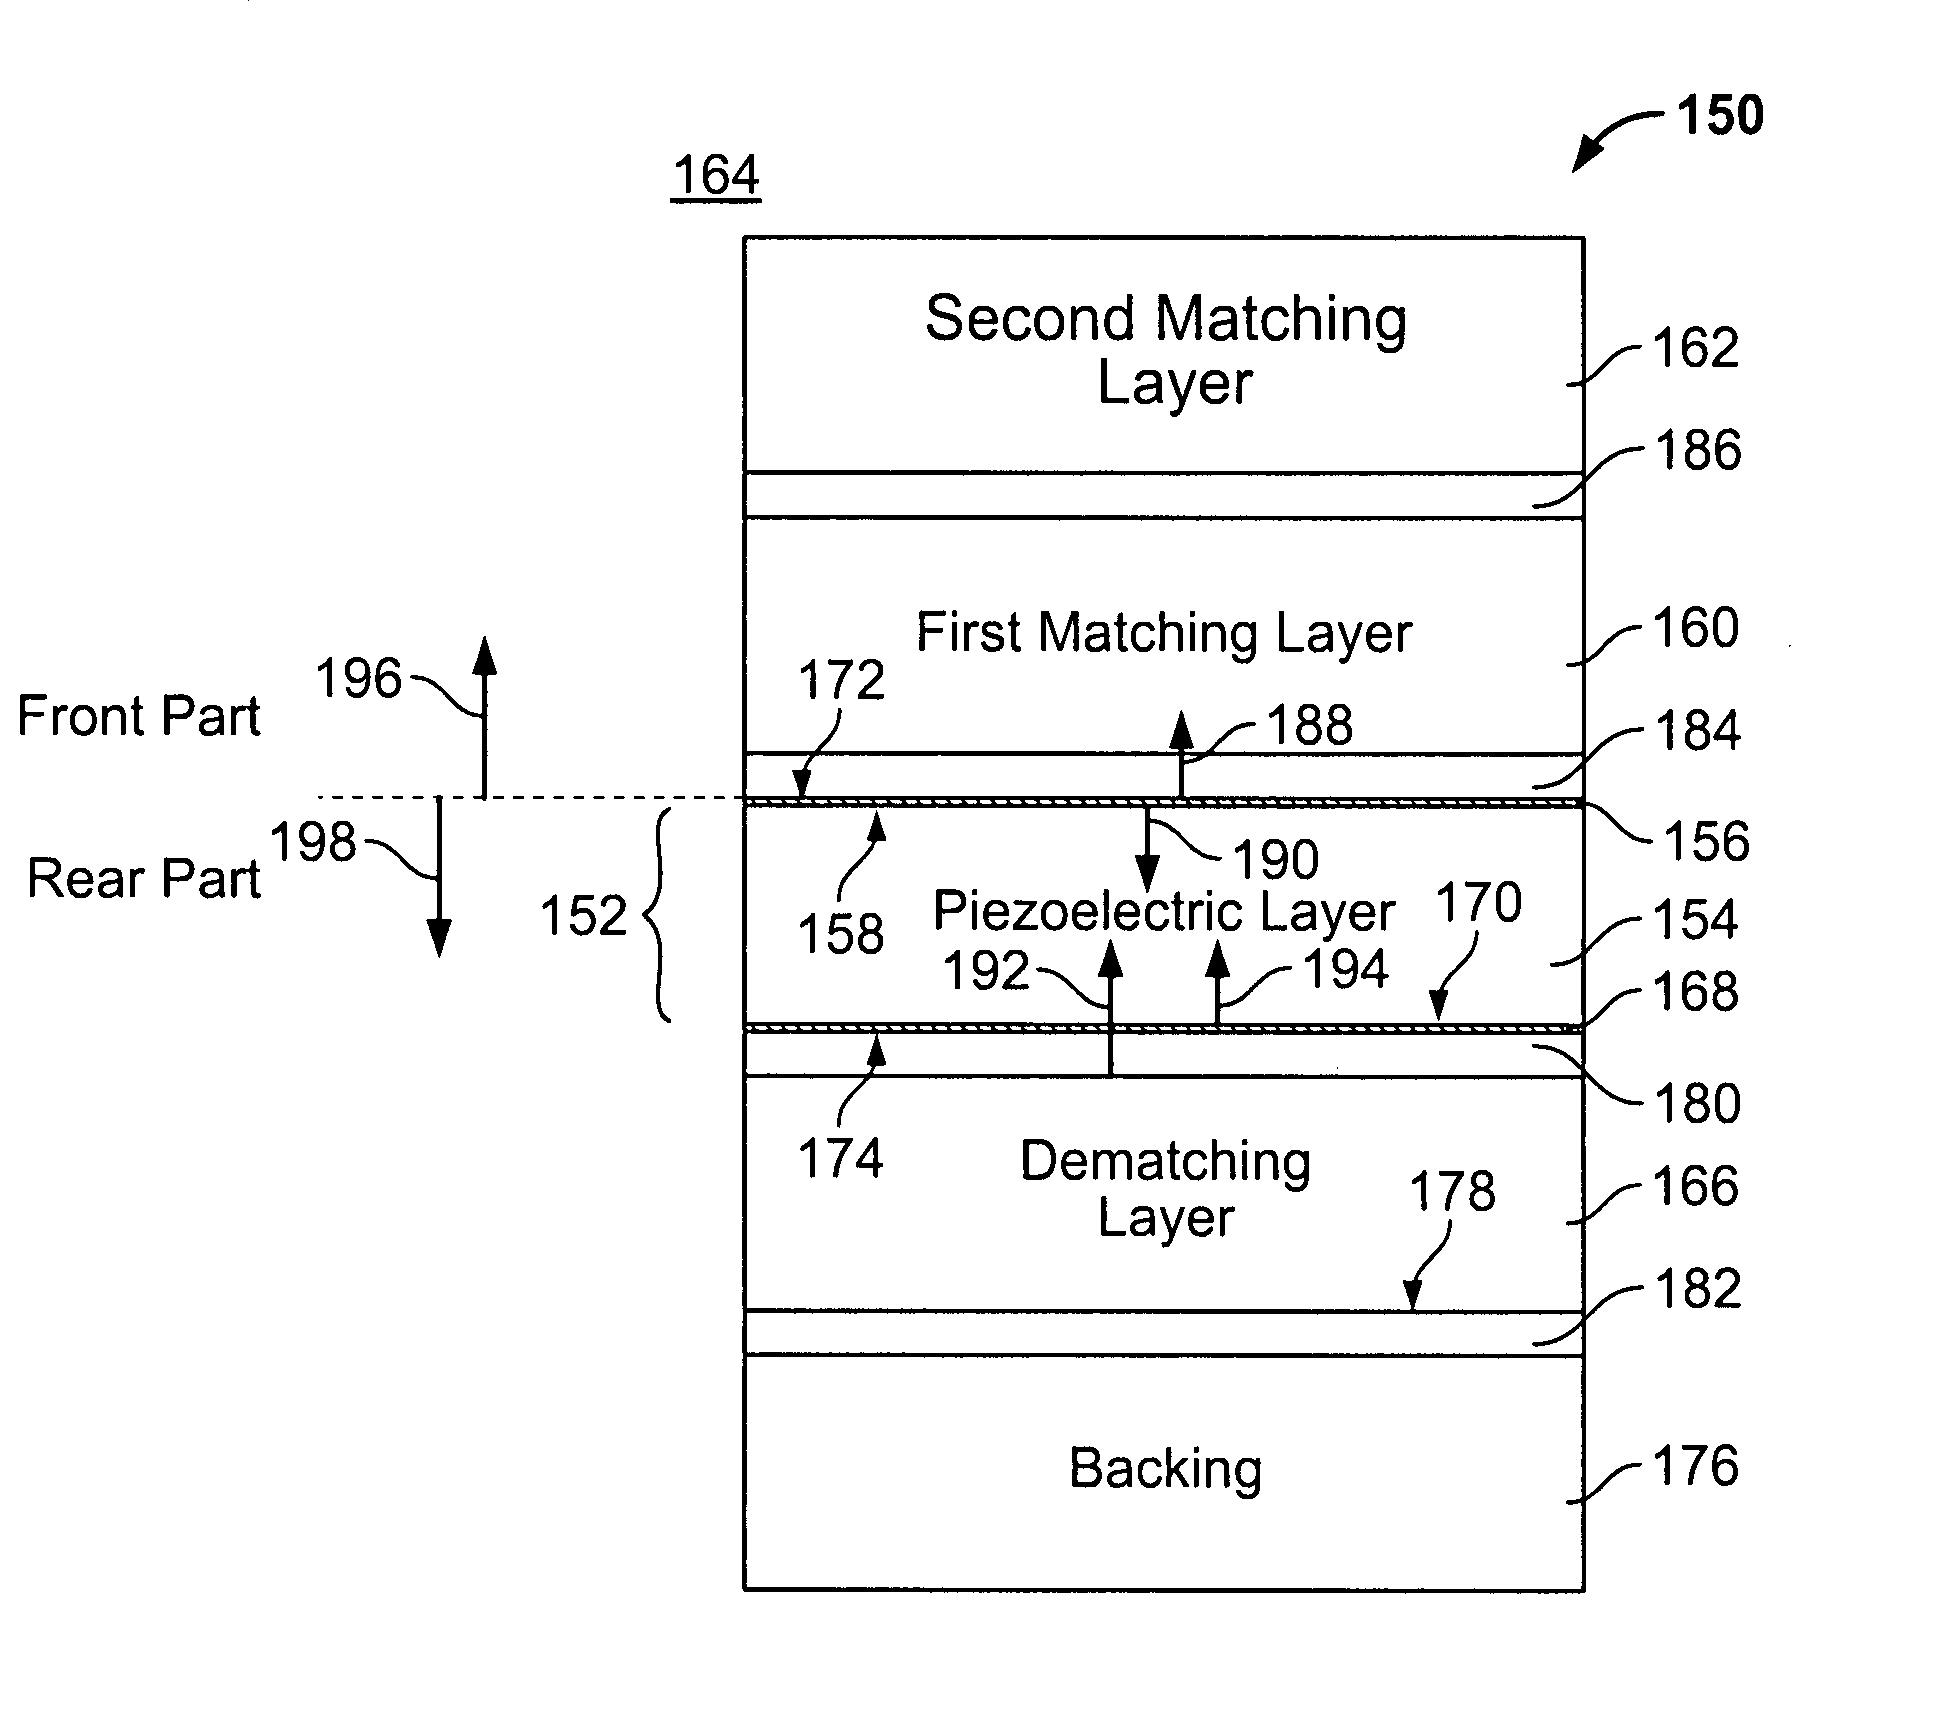 Method and apparatus for optimized dematching layer assembly in an ultrasound transducer